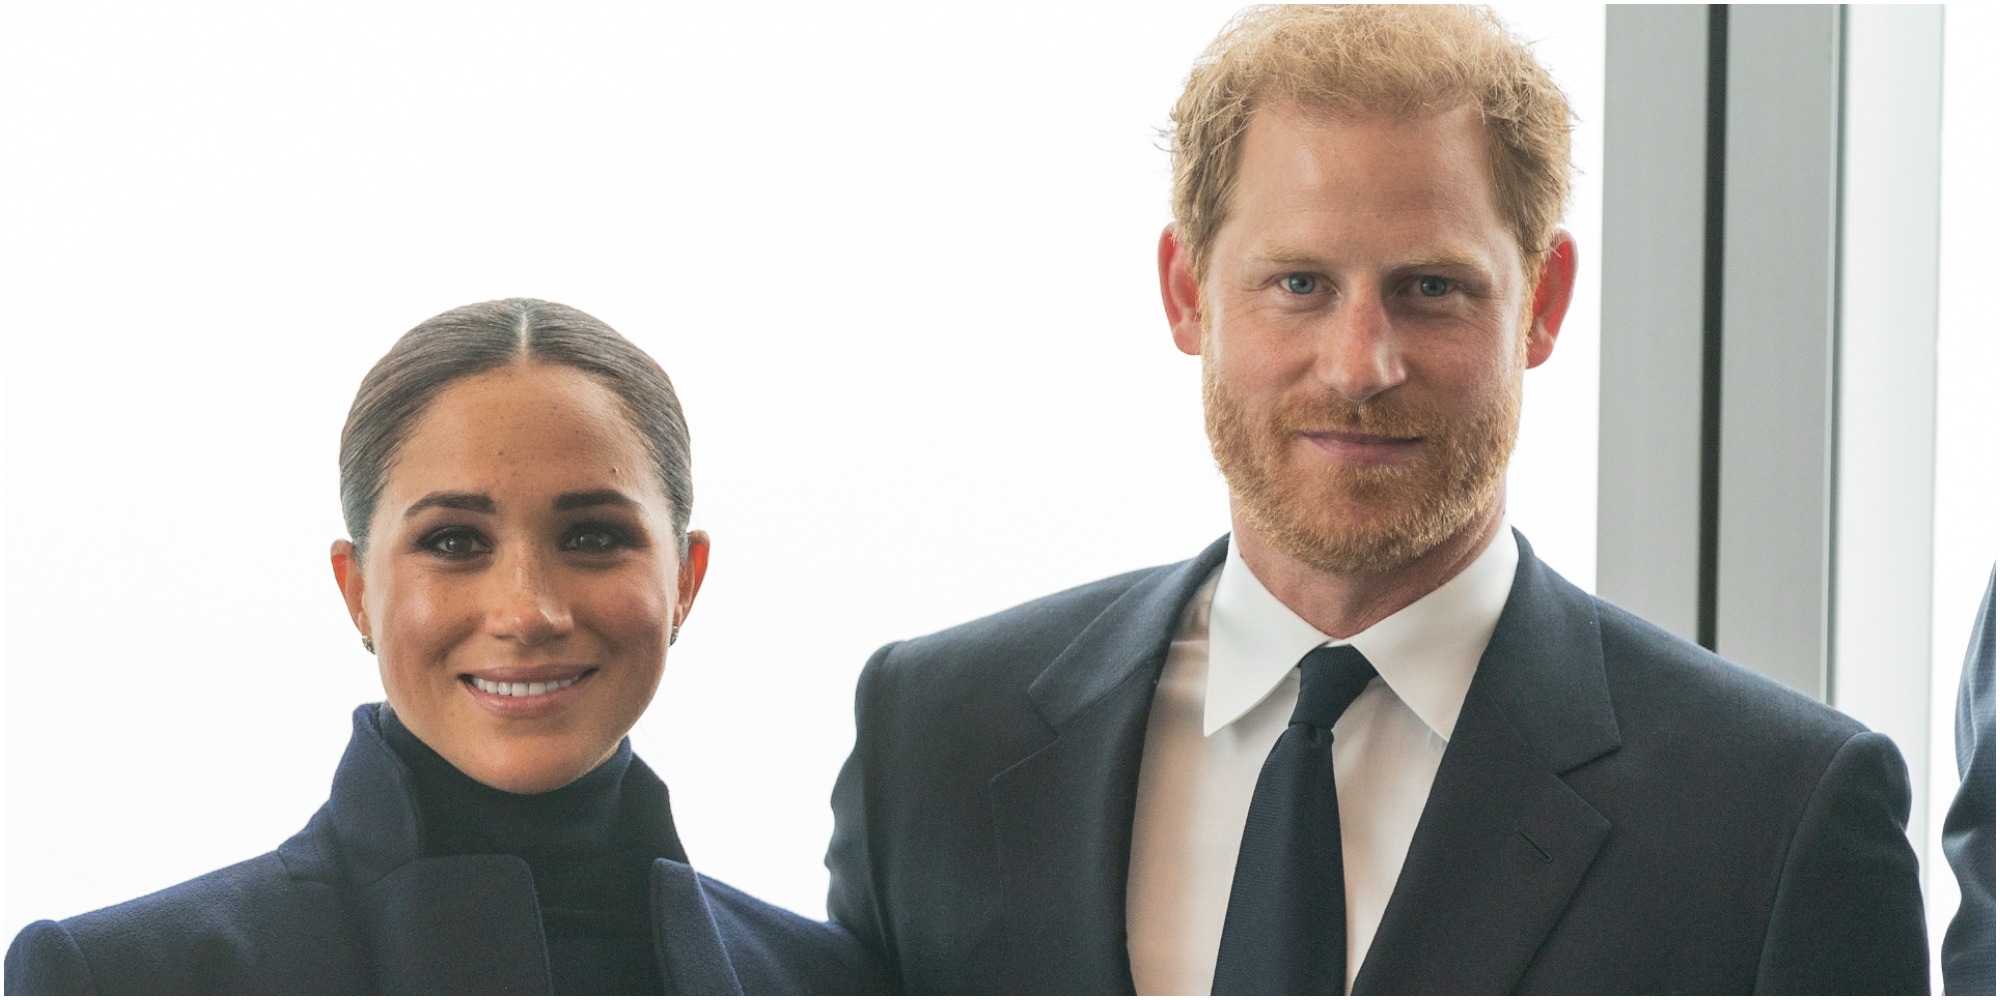 Meghan Markle and Prince Harry pose for a photo op in New York City.